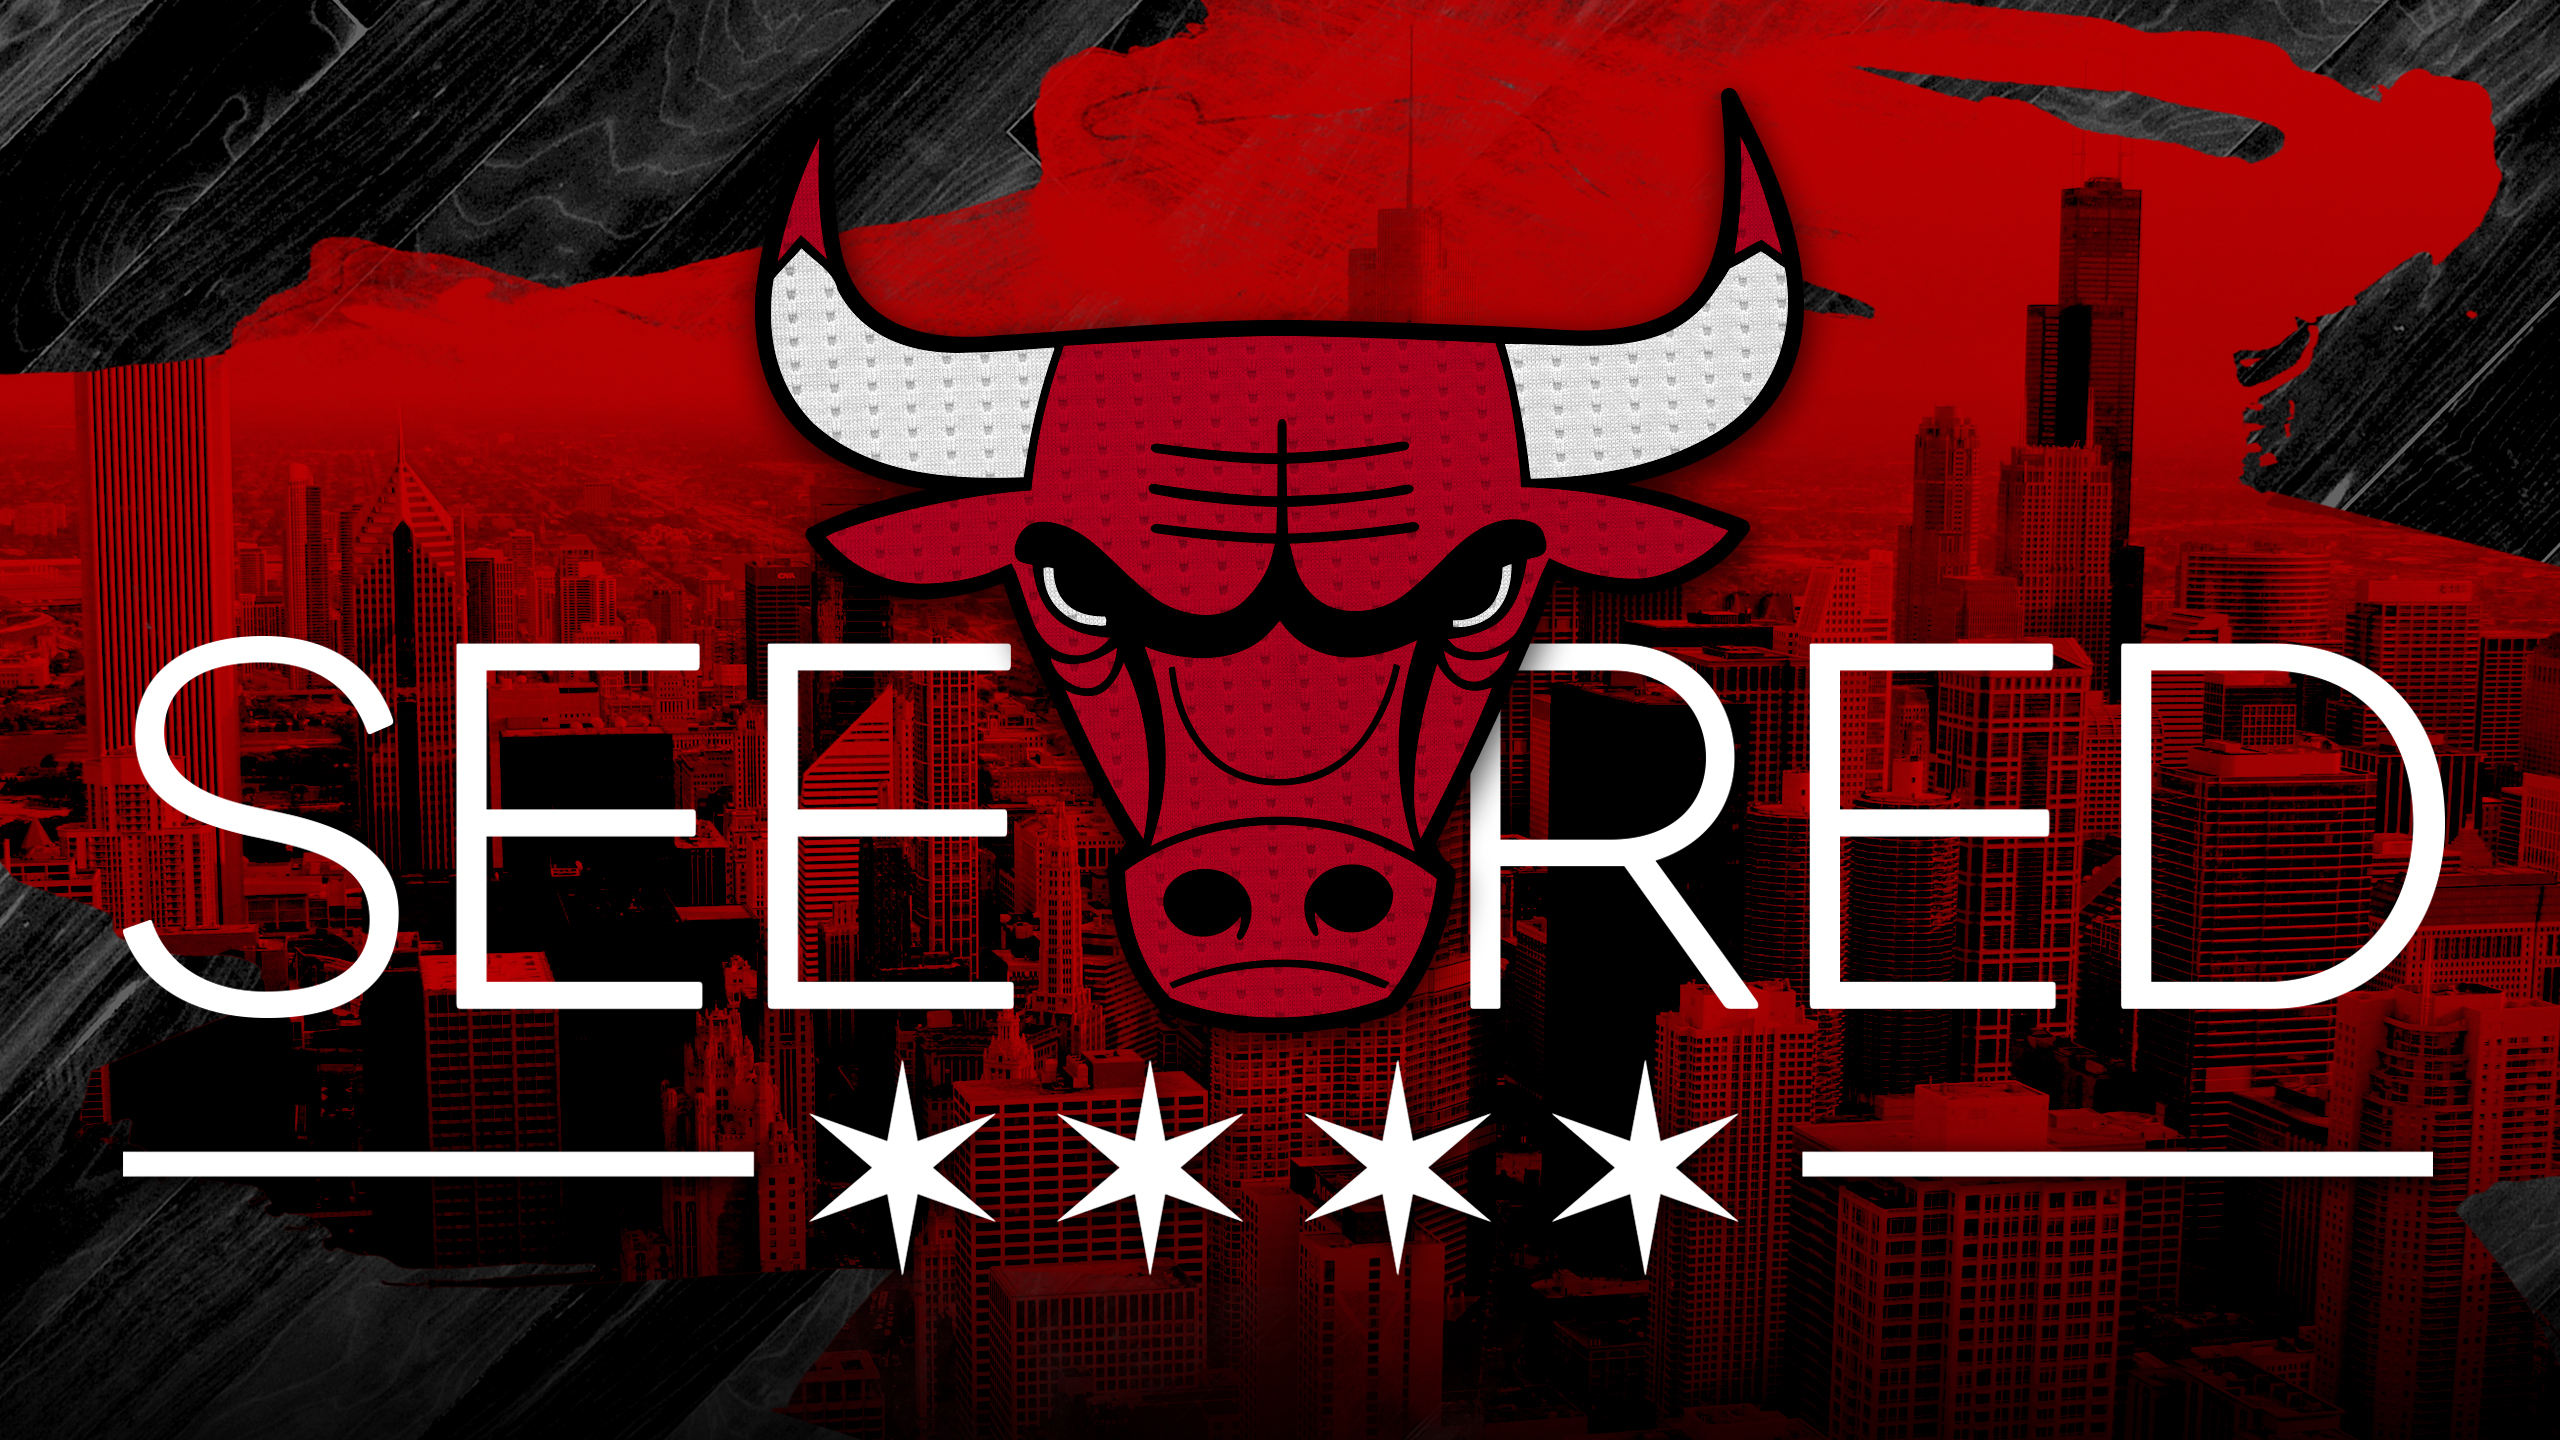  See Red Wallpaper Chicago Bulls